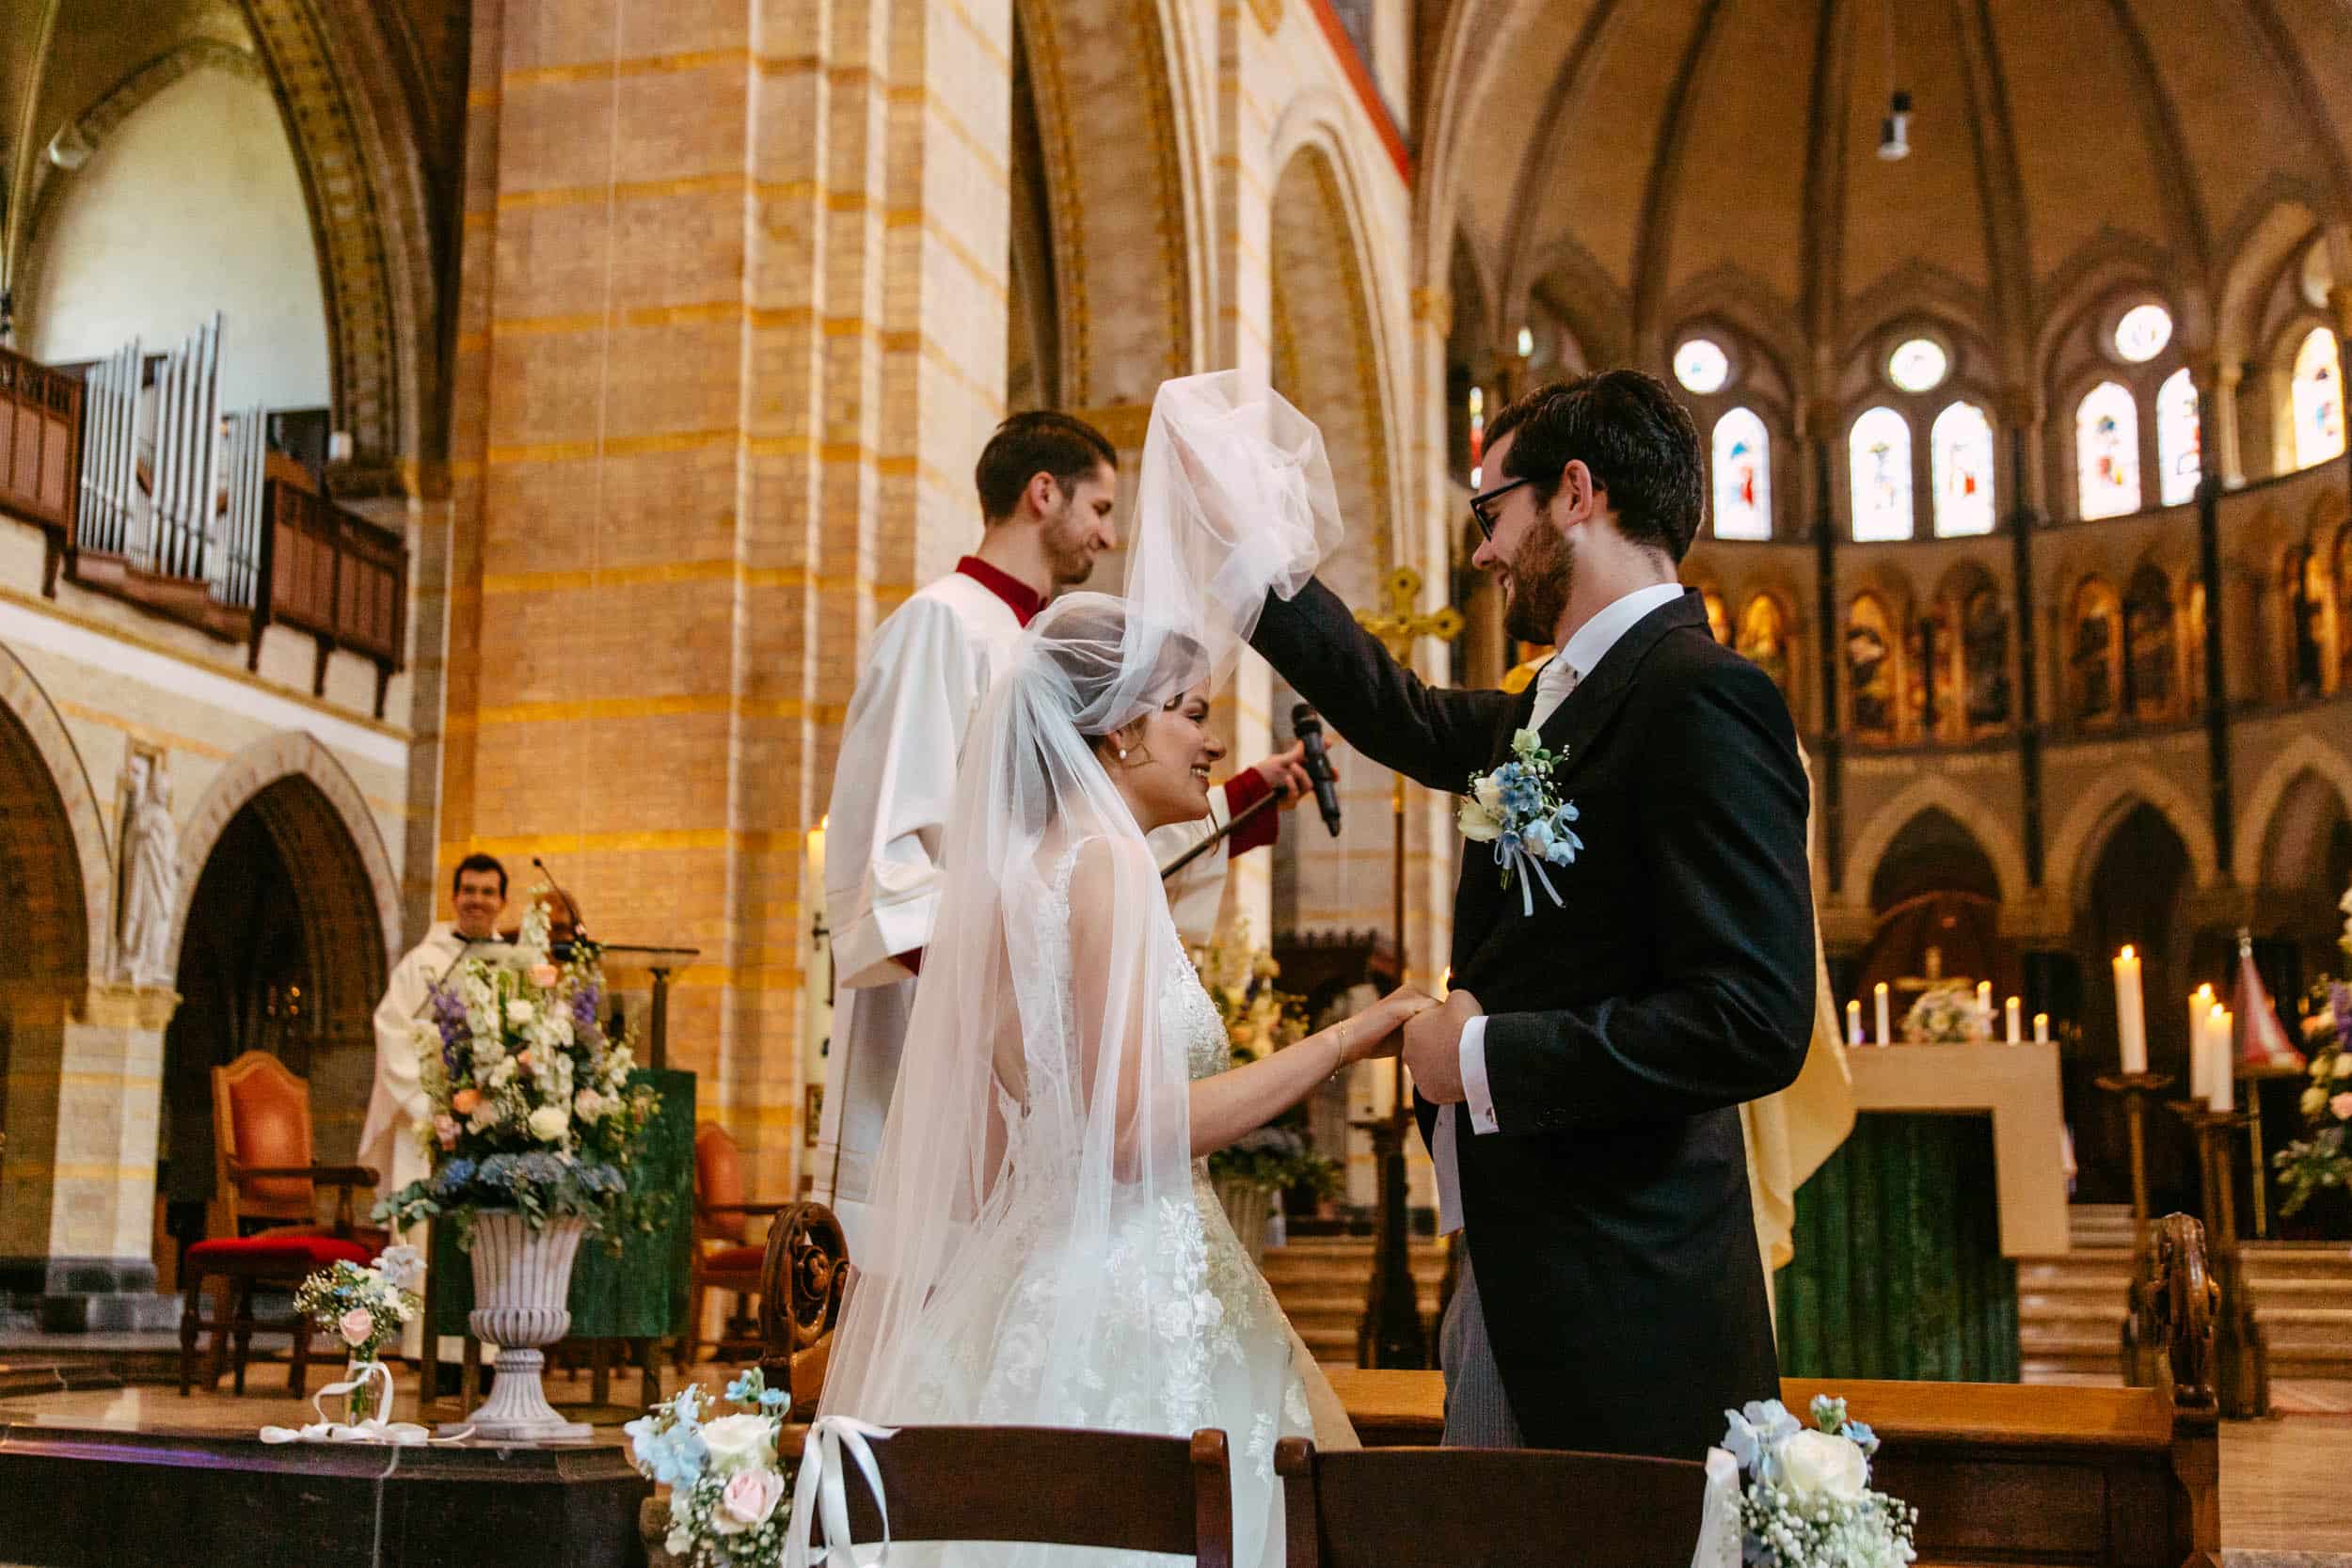 A bride and groom putting their veil on each other during their wedding in a church.